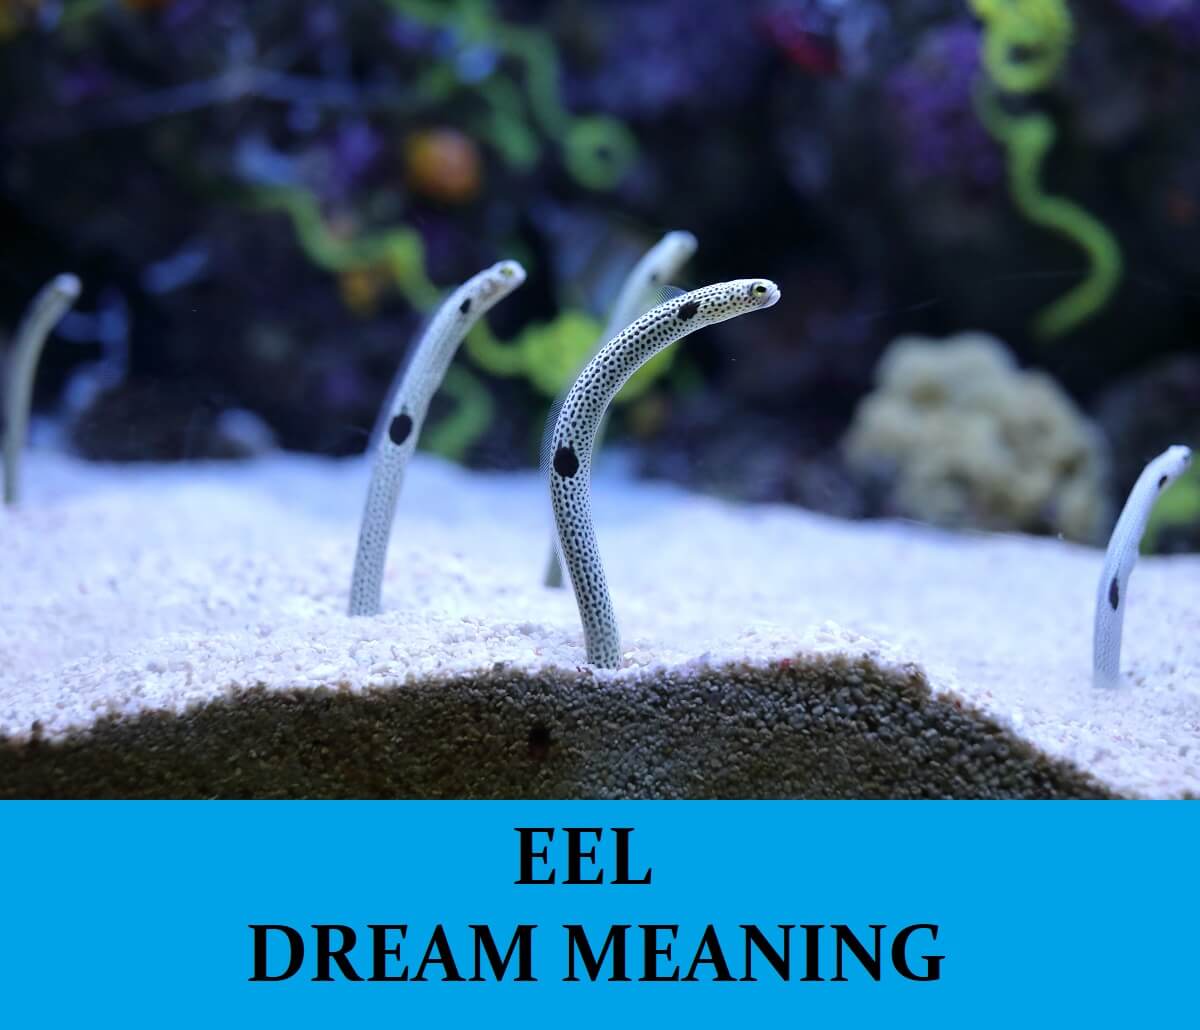 Eel Dream Meaning Top 12 Dreams About Eel Dream Meaning Net